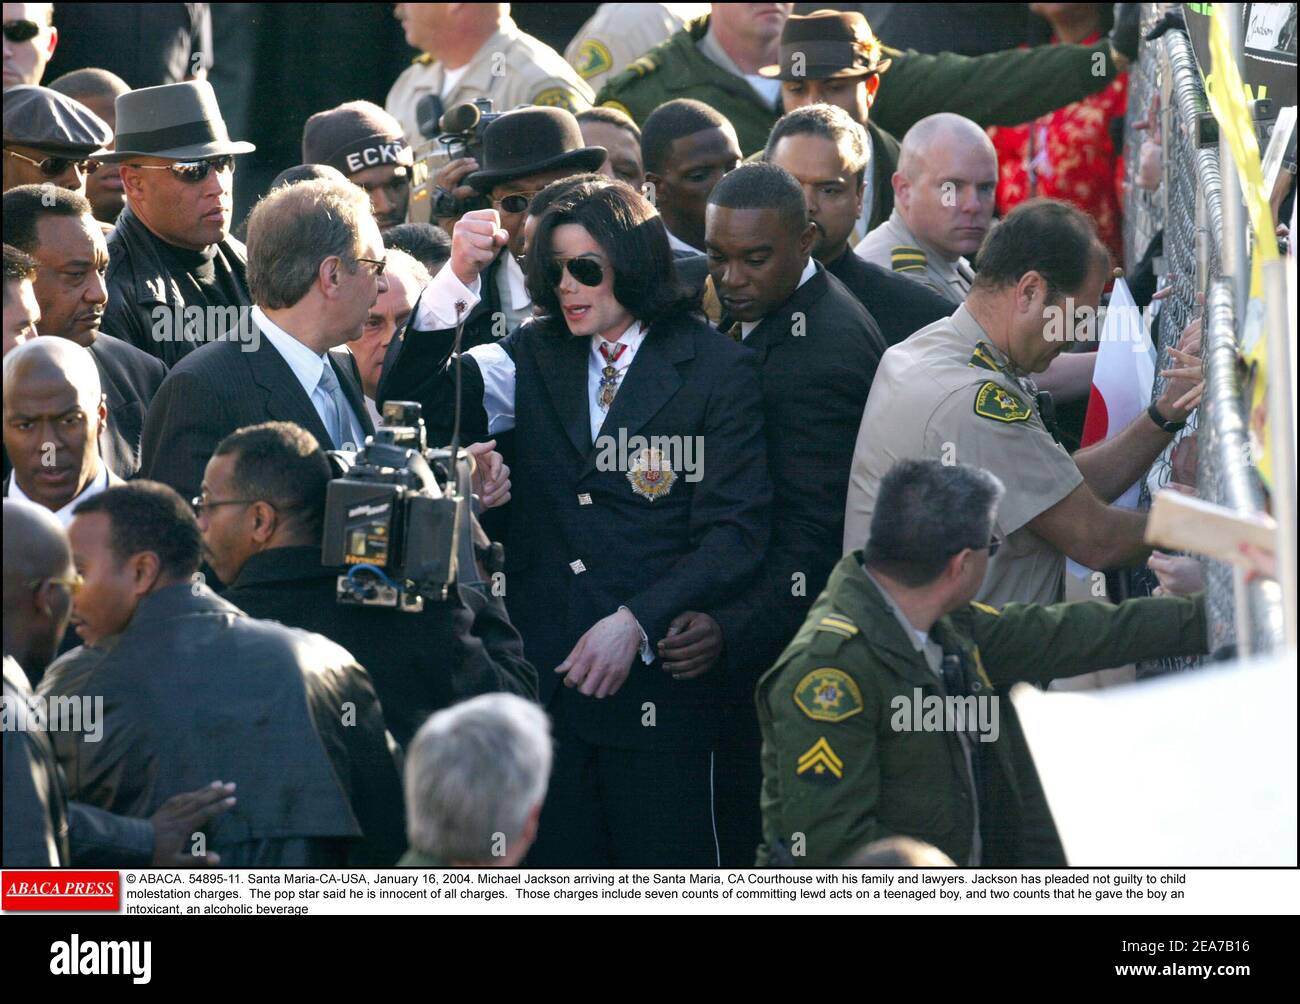 © ABACA. 54895-11. Santa Maria-CA-USA, January 16, 2004. Michael Jackson arriving at the Santa Maria, CA Courthouse with his family and lawyers. Jackson has pleaded not guilty to child molestation charges. The pop star said he is innocent of all charges. Those charges include seven counts of committing lewd acts on a teenaged boy, and two counts that he gave the boy an intoxicant, an alcoholic beverage Stock Photo